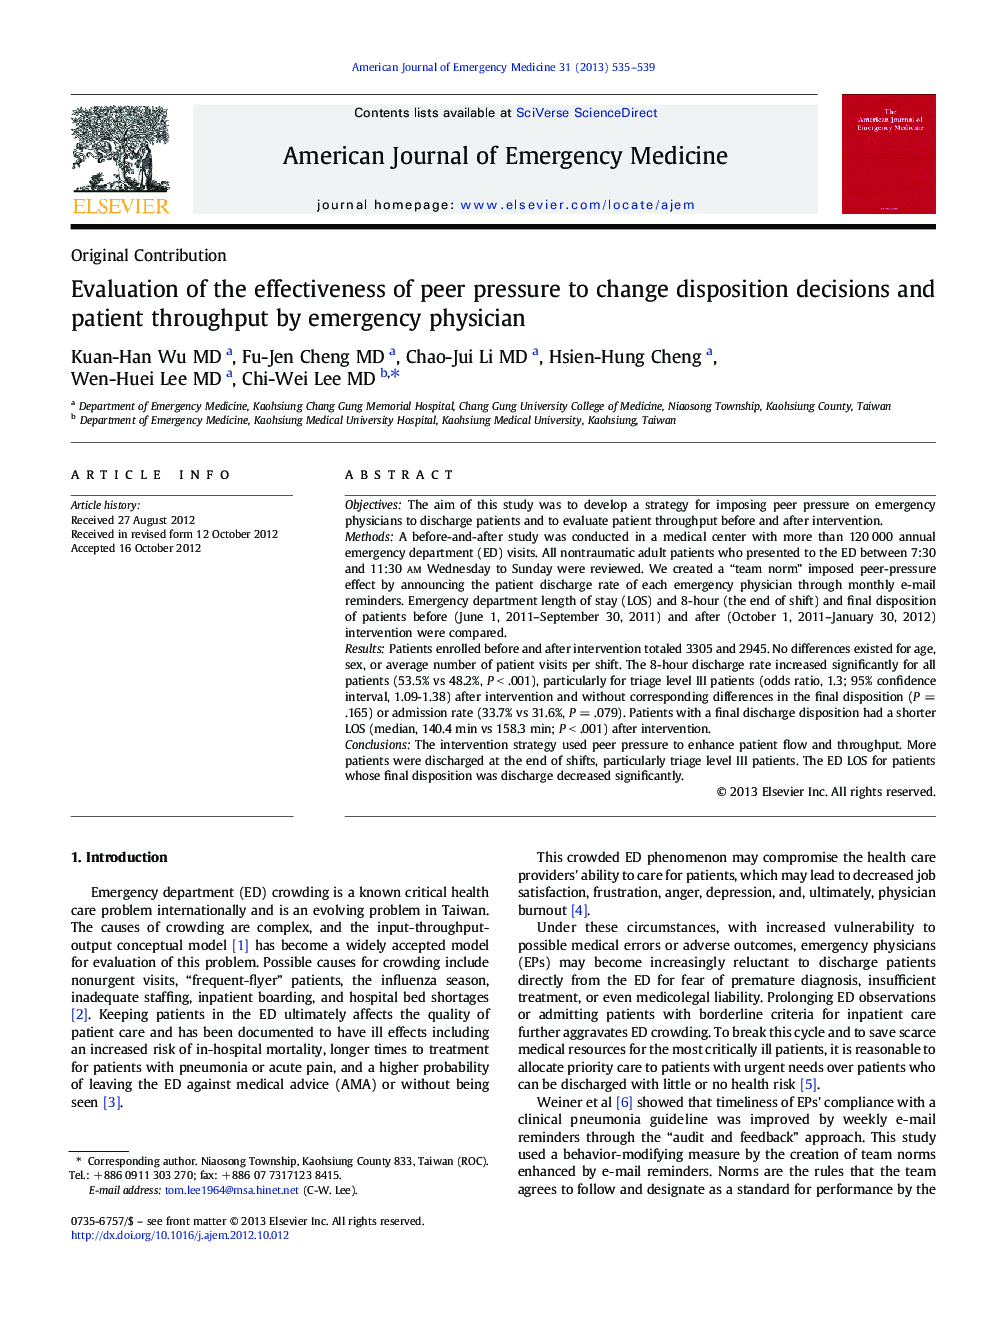 Evaluation of the effectiveness of peer pressure to change disposition decisions and patient throughput by emergency physician